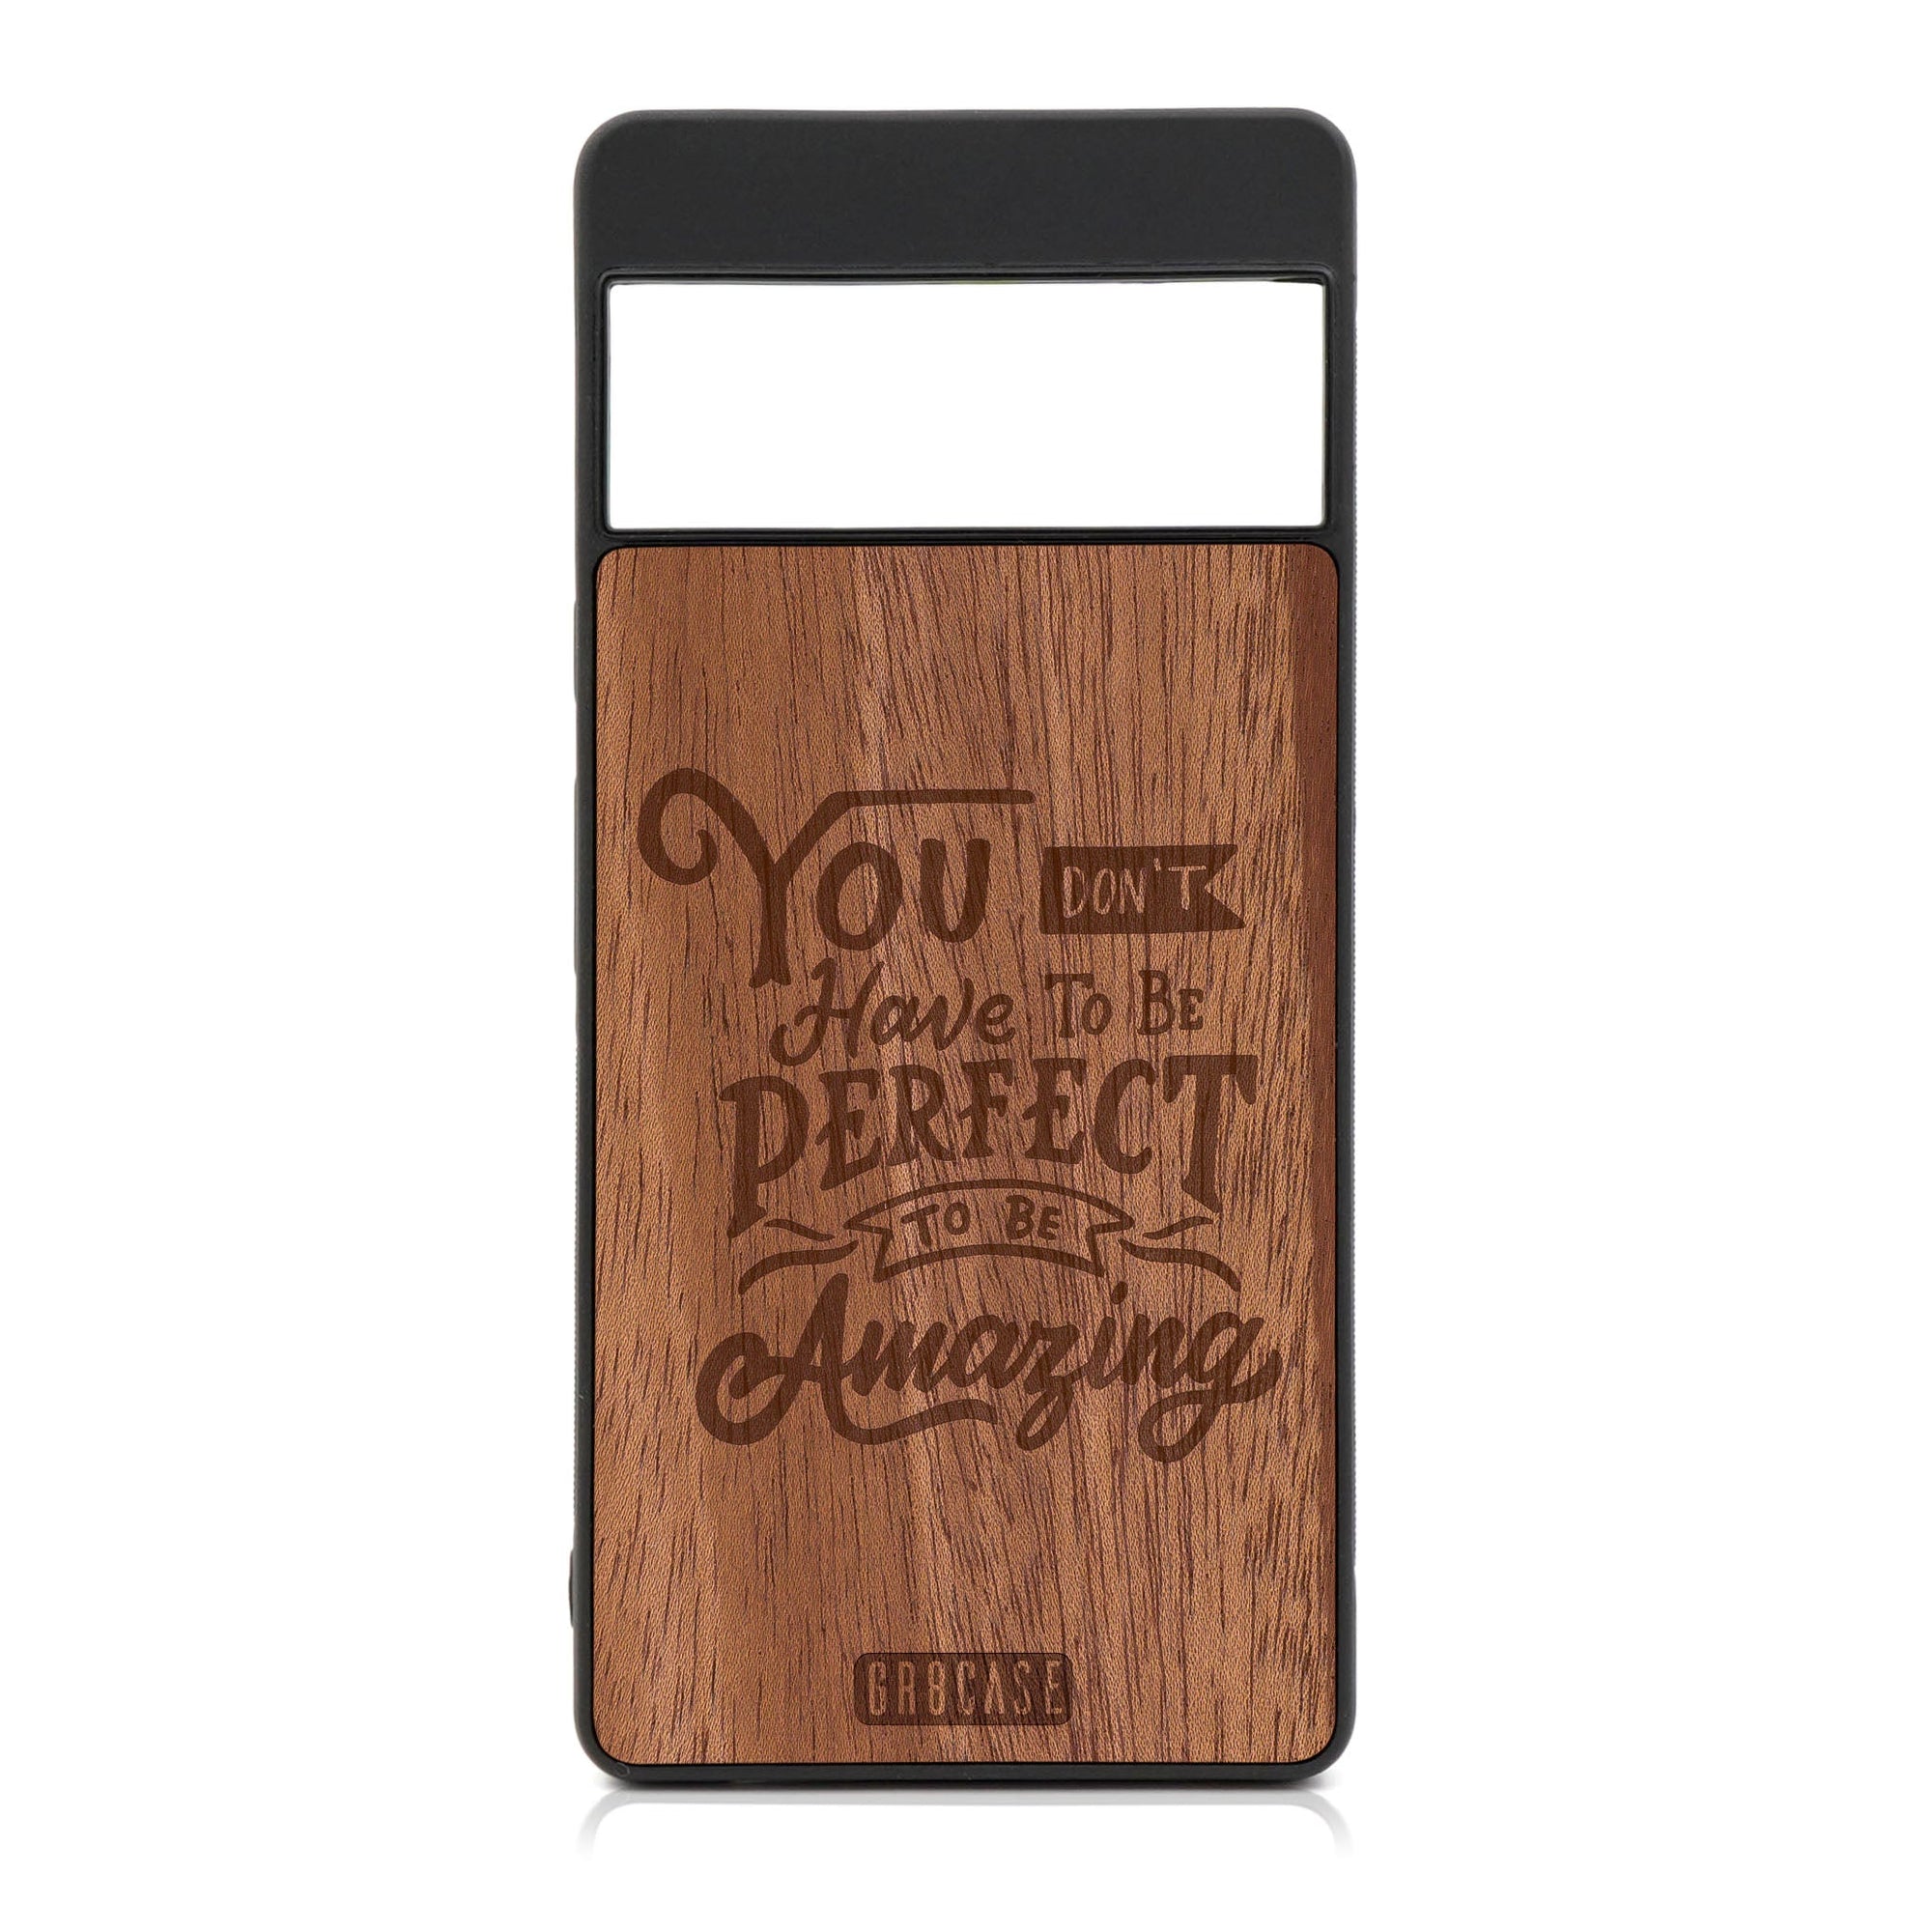 You Don't Have To Be Perfect To Be Amazing Design Wood Case For Google Pixel 6 Pro